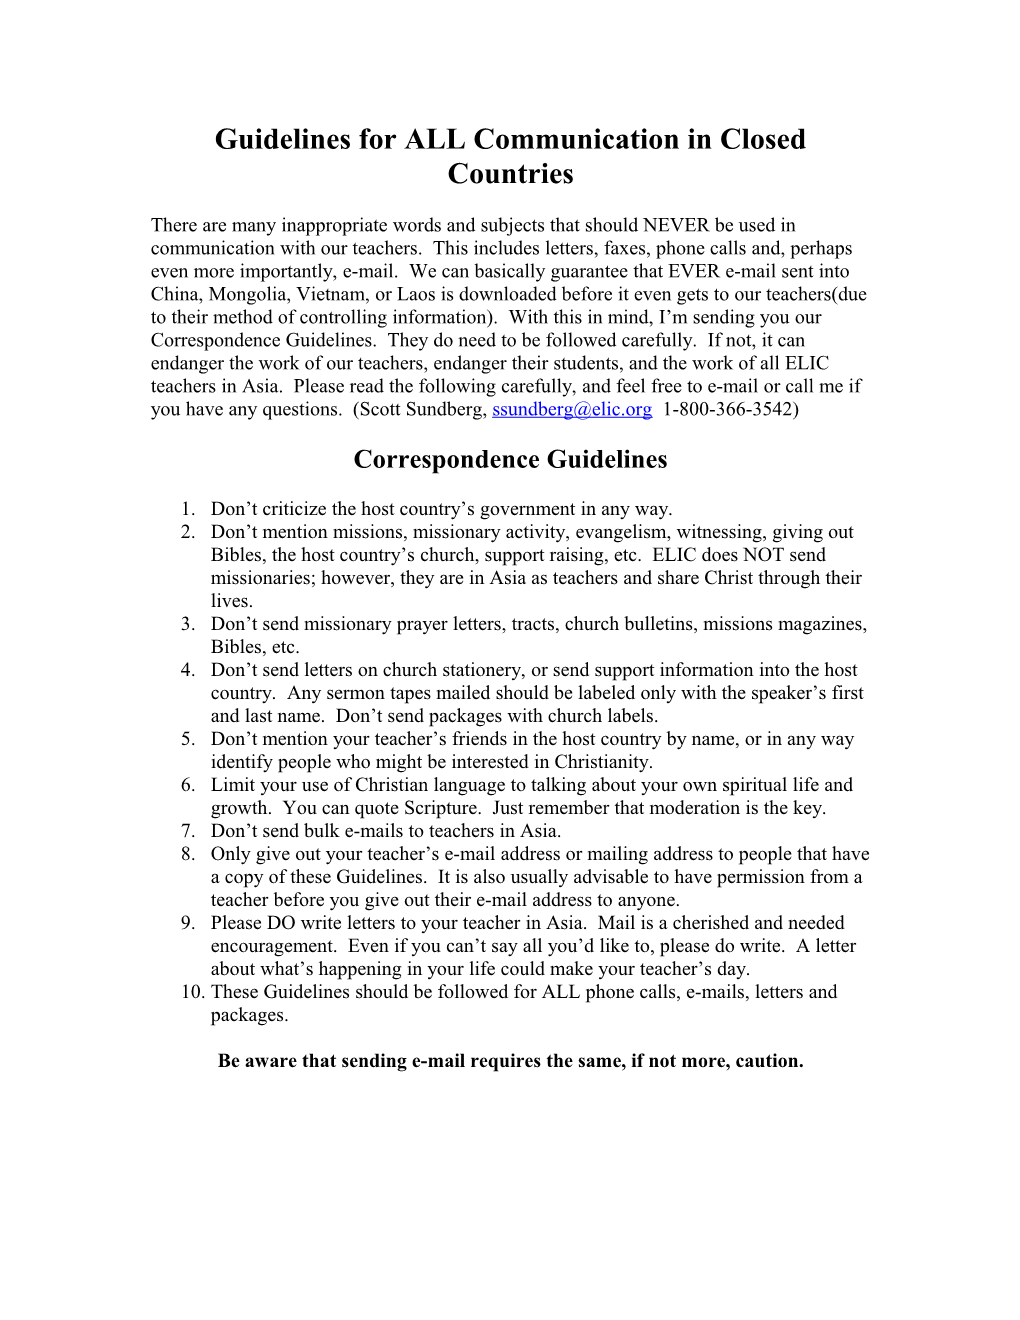 Guidelines for ALL Communication in Closed Countries